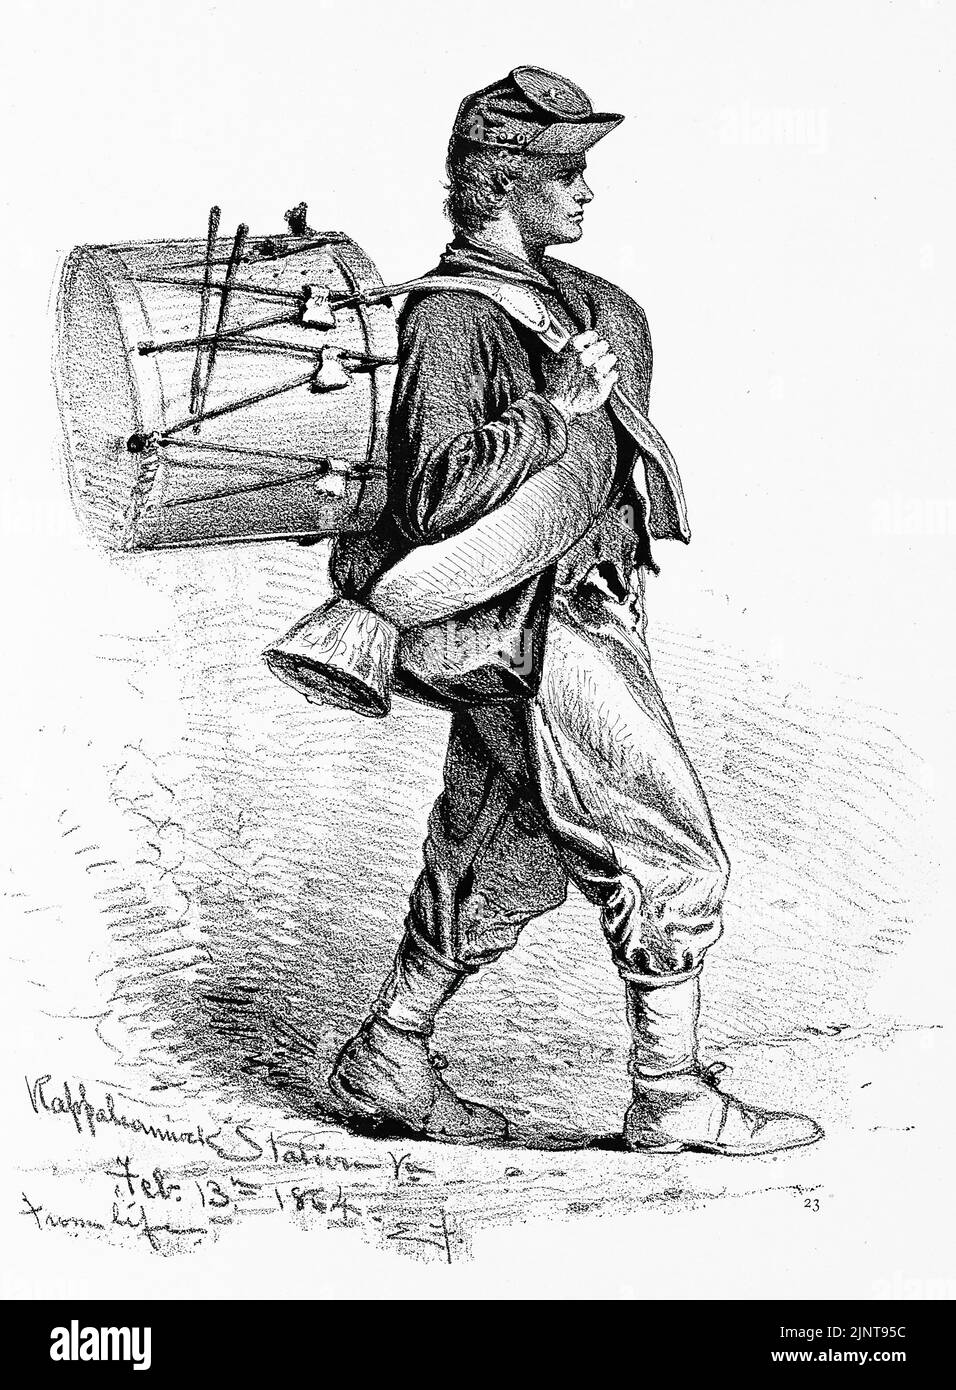 Life Portrait of a Union Drummer Boy. Rappahannock Station, February 13th, 1864. 19th century American Civil War illustration by Edwin Forbes Stock Photo